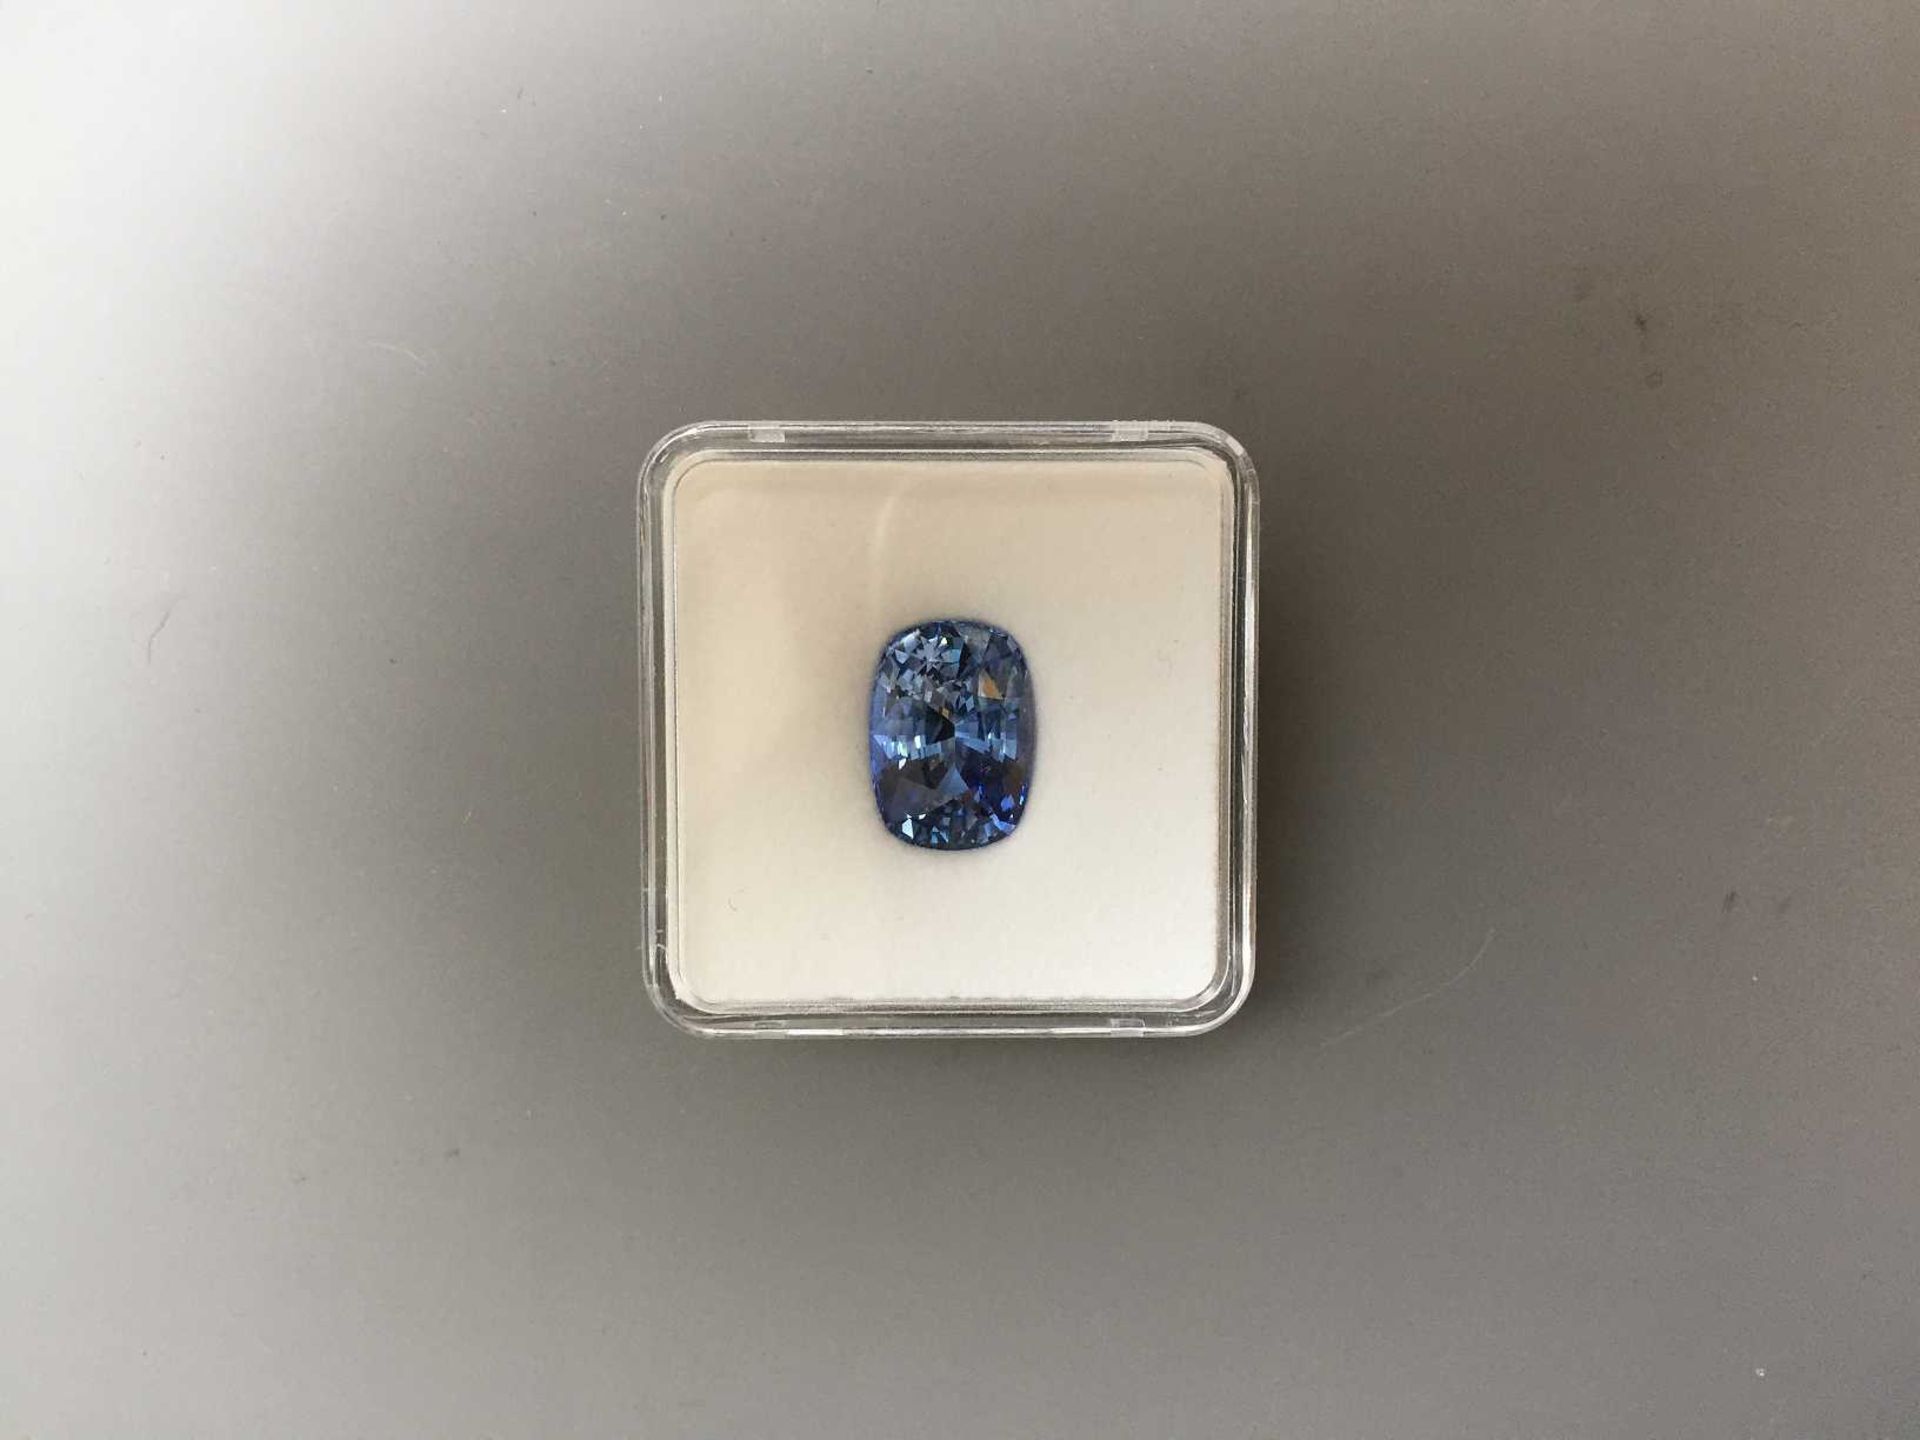 9.46ct Sapphire,AIGS certification GF15121919,14.04x10.07x7.5mm,appraisal 25000 - Image 3 of 3